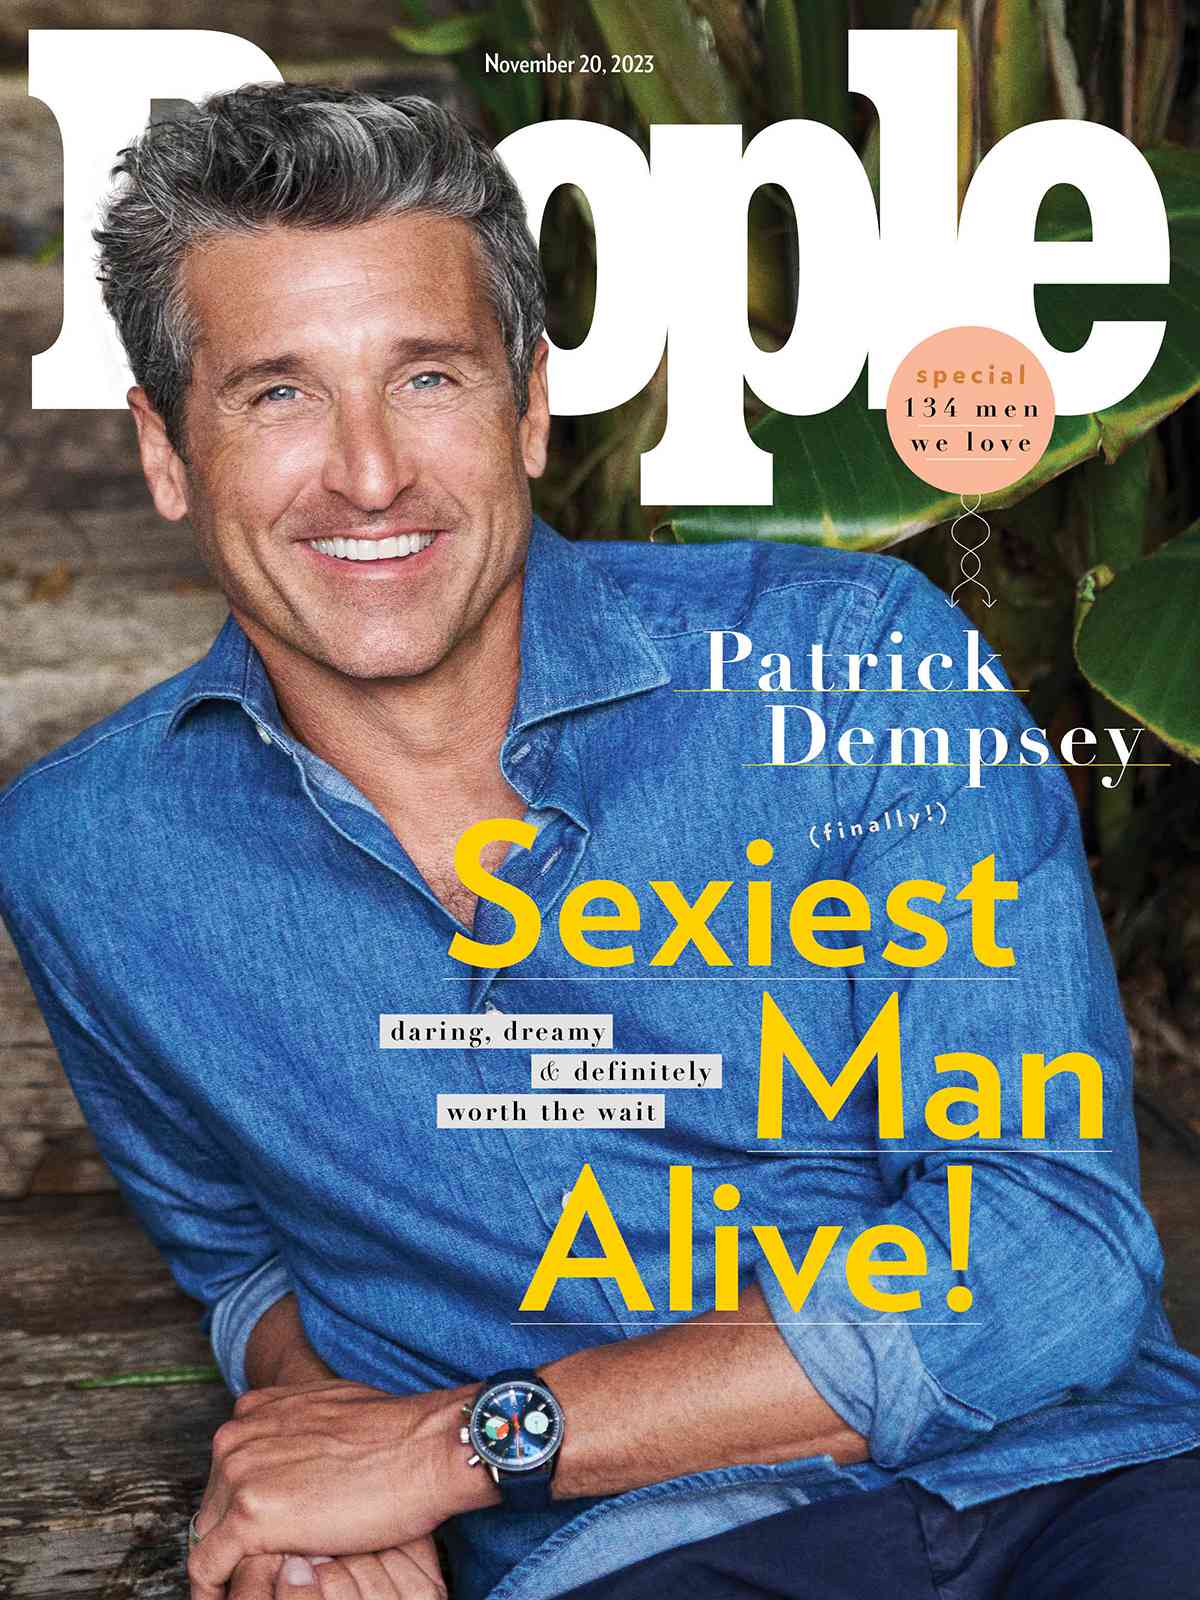 People's Sexiest Man Alive 2023 cover; Patrick Dempsey